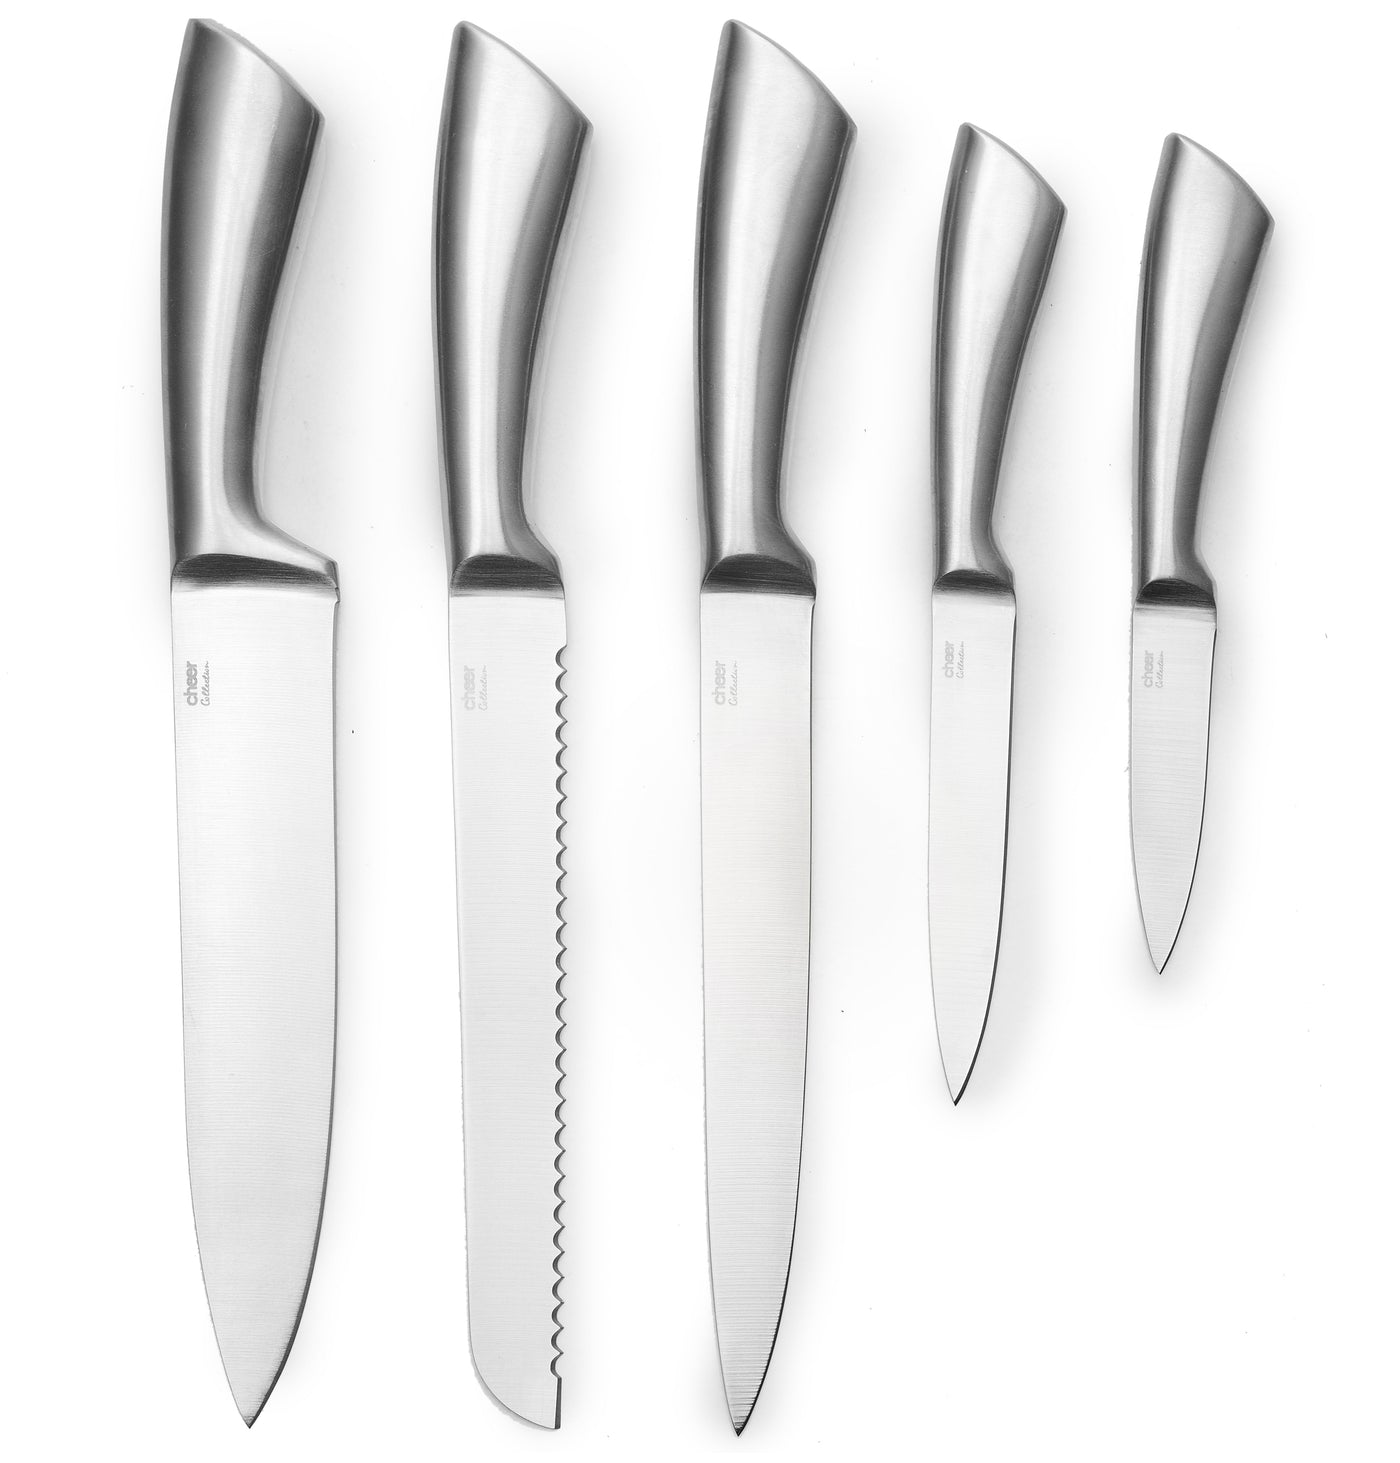 Cheer Collection 6 Piece Stainless Steel Chef Knife Set with Acrylic Stand